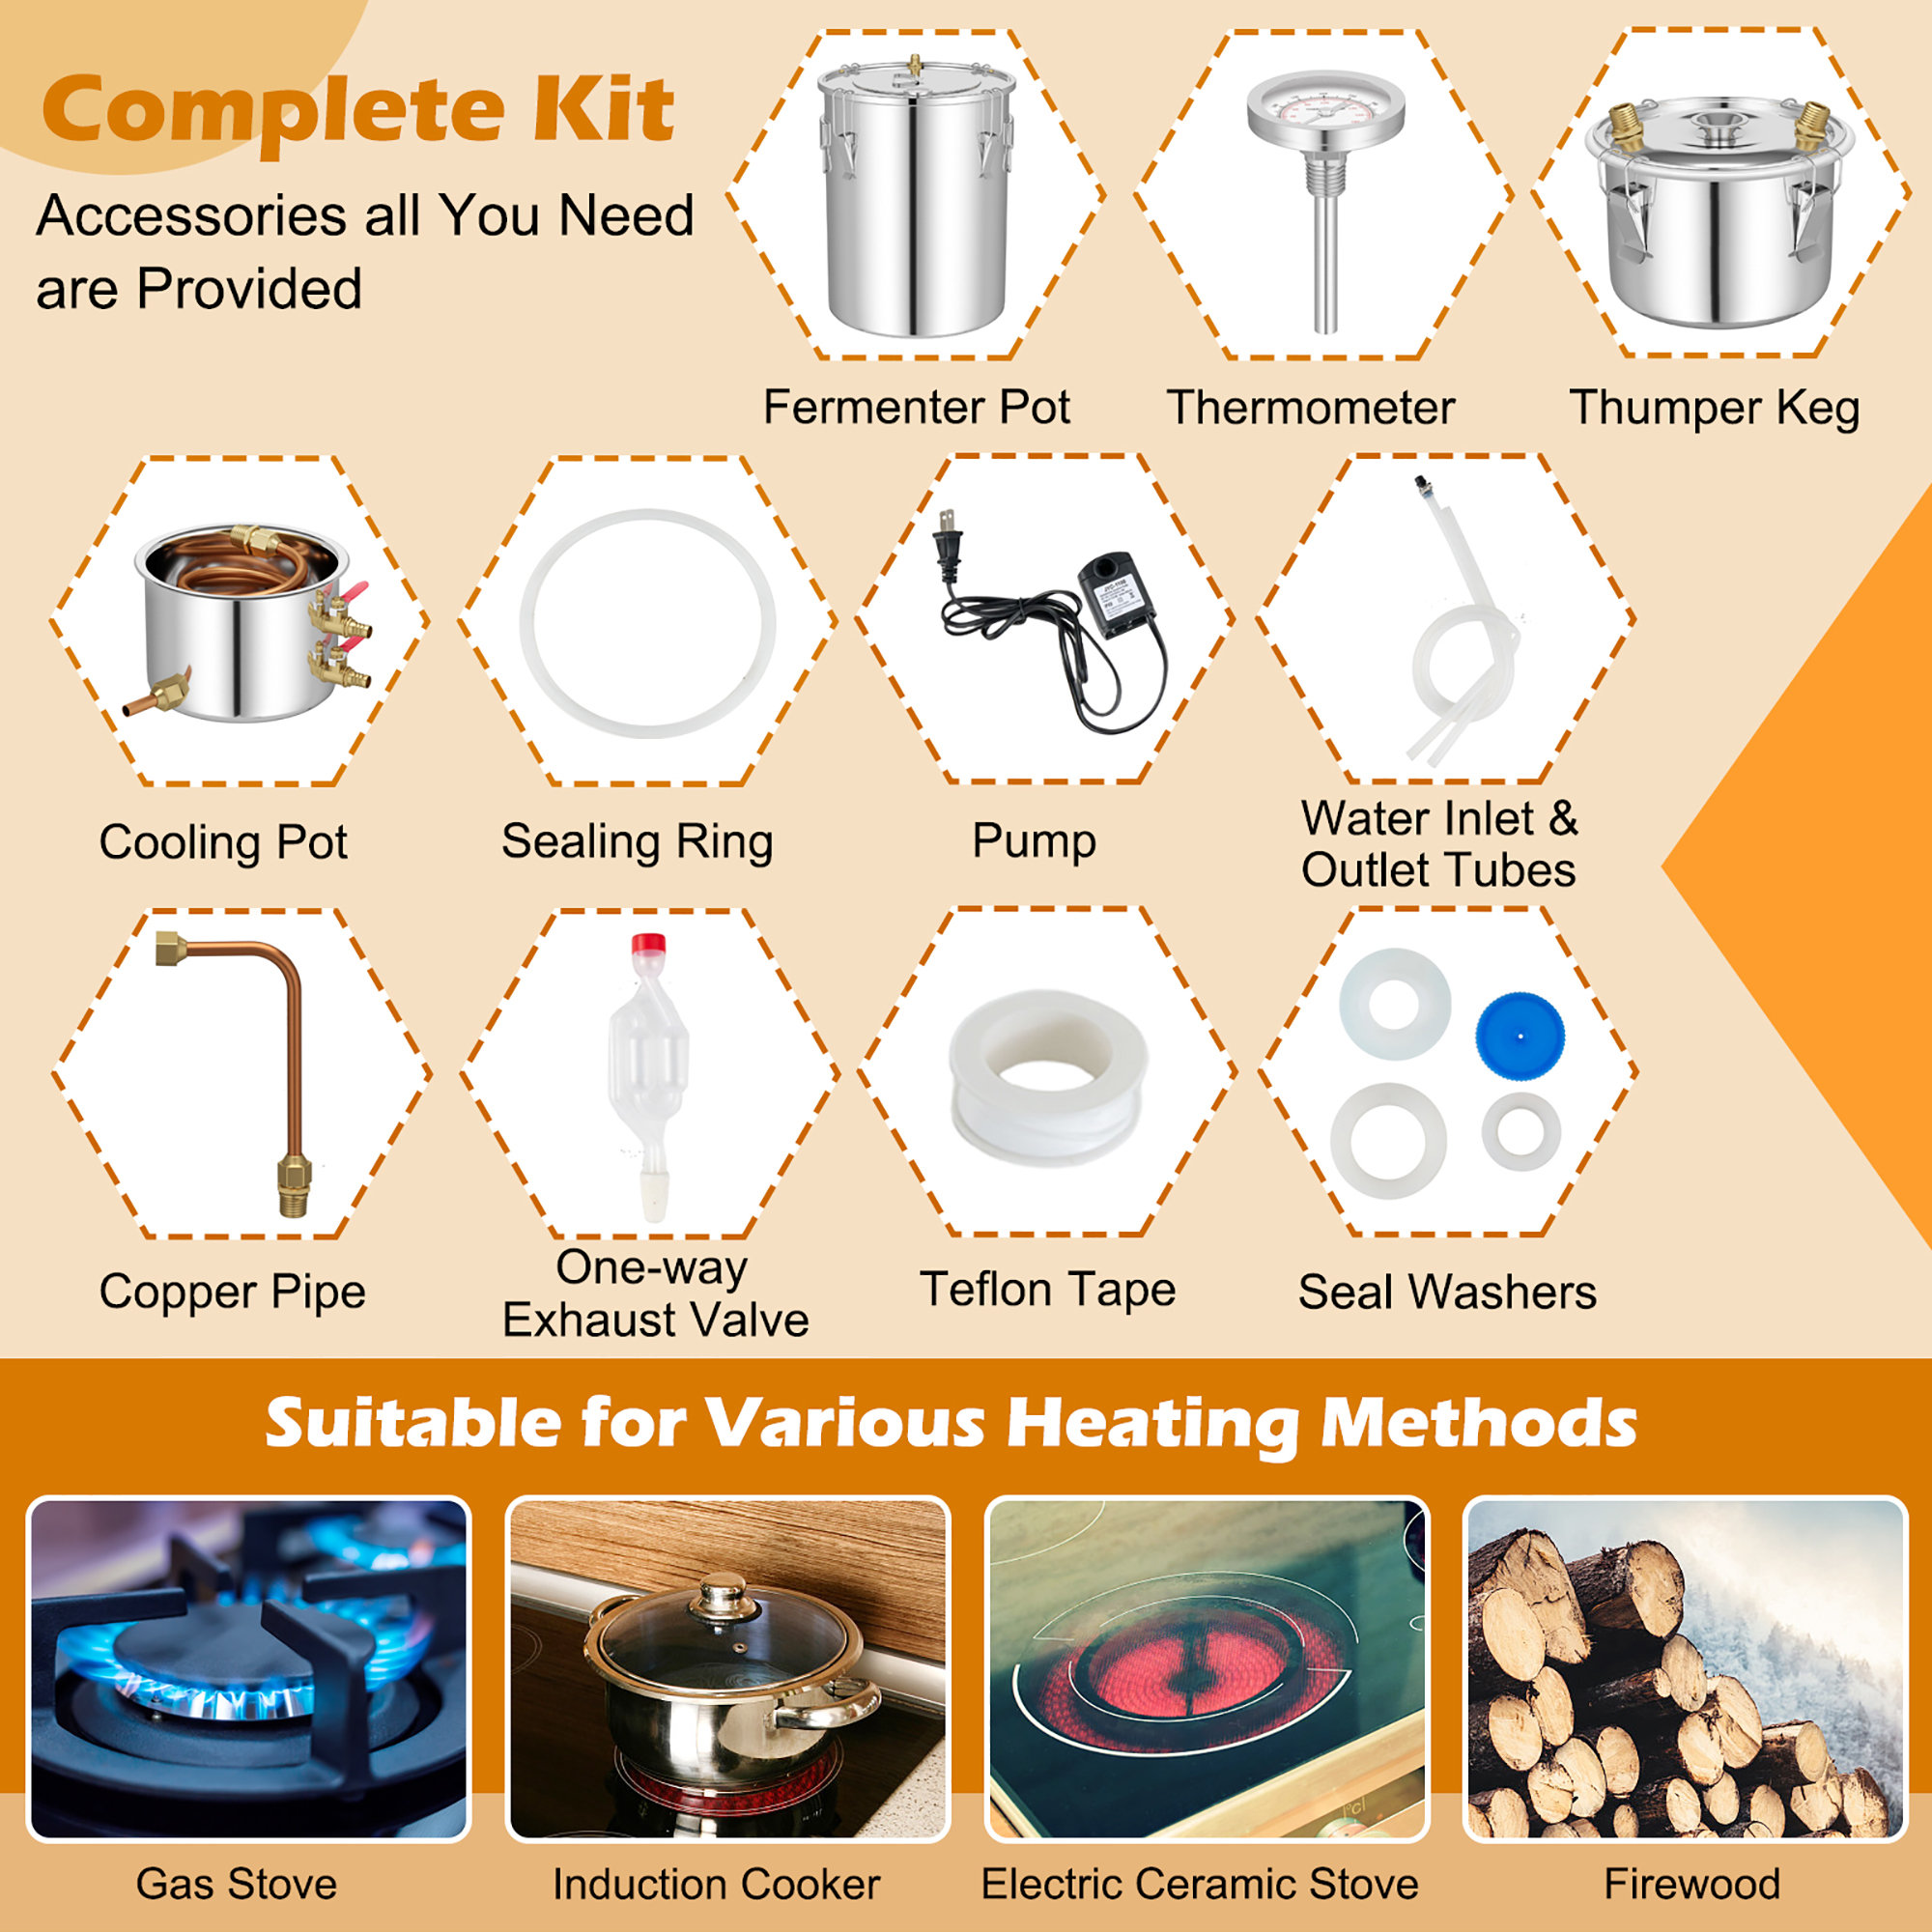 Beer Making Kit (w/ Brew Pot, Faucet, Thermometer, & More)